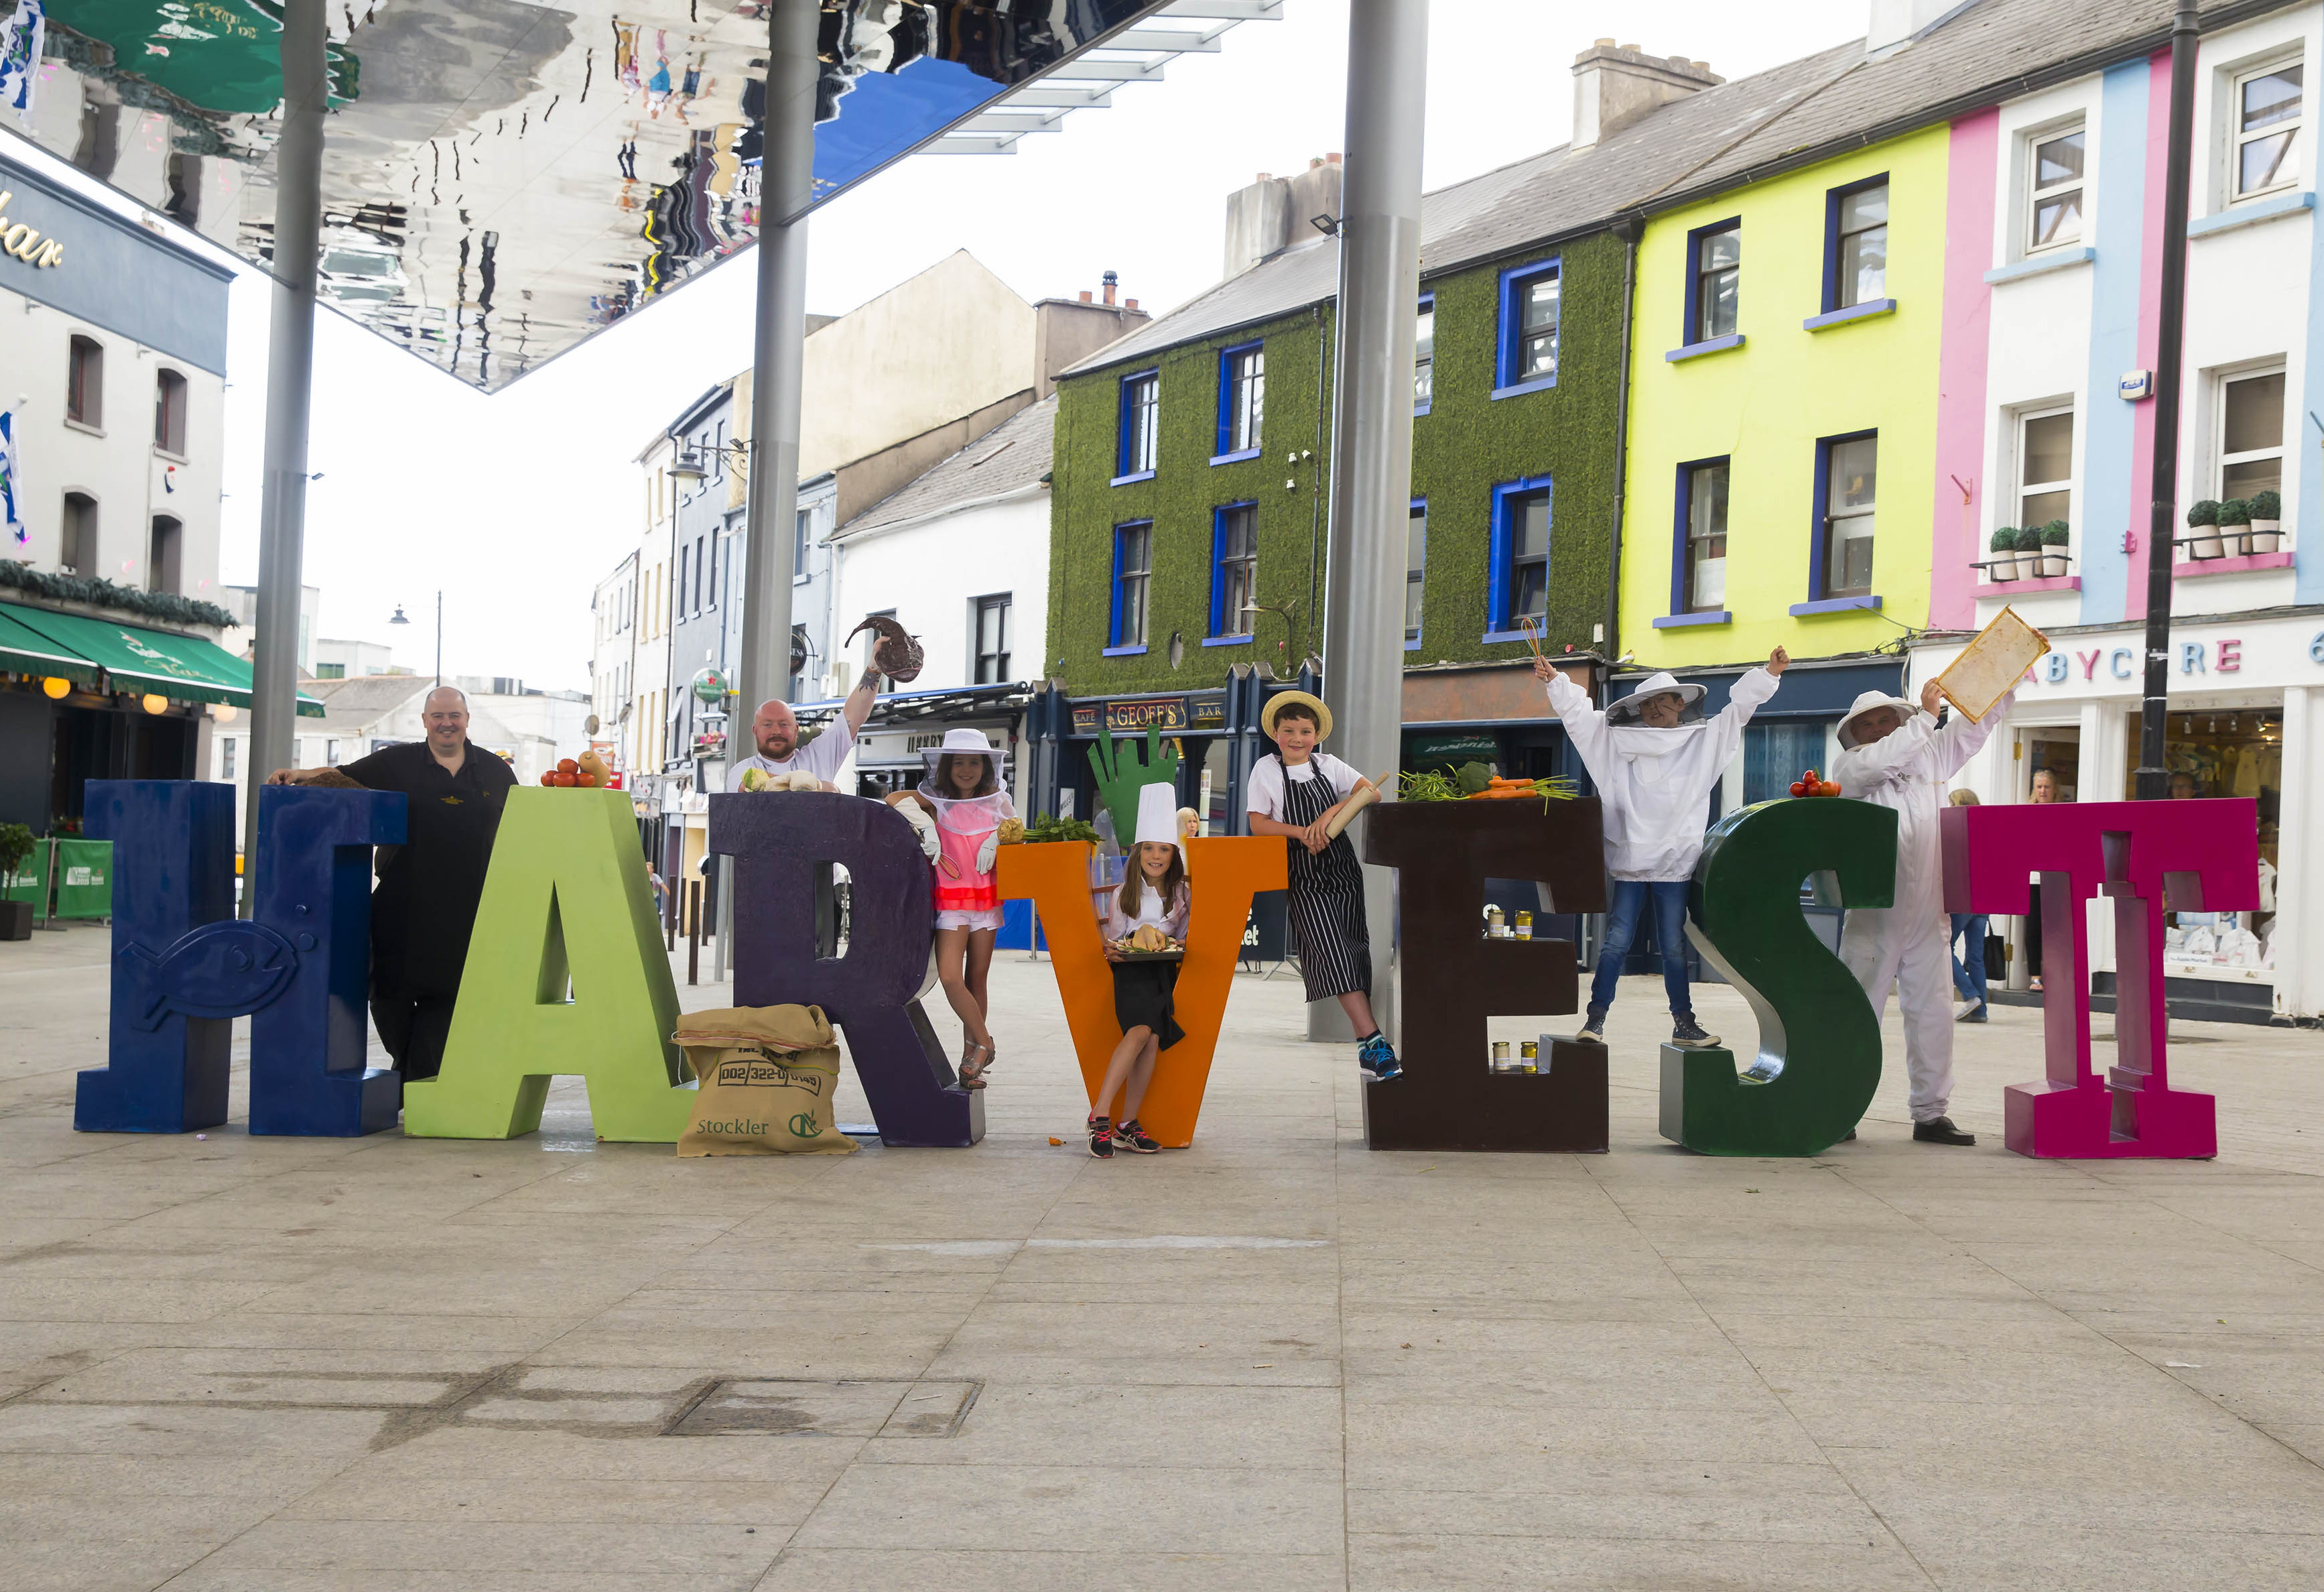 Waterford Harvest Festival Events On In Waterford Ireland Your Days Out